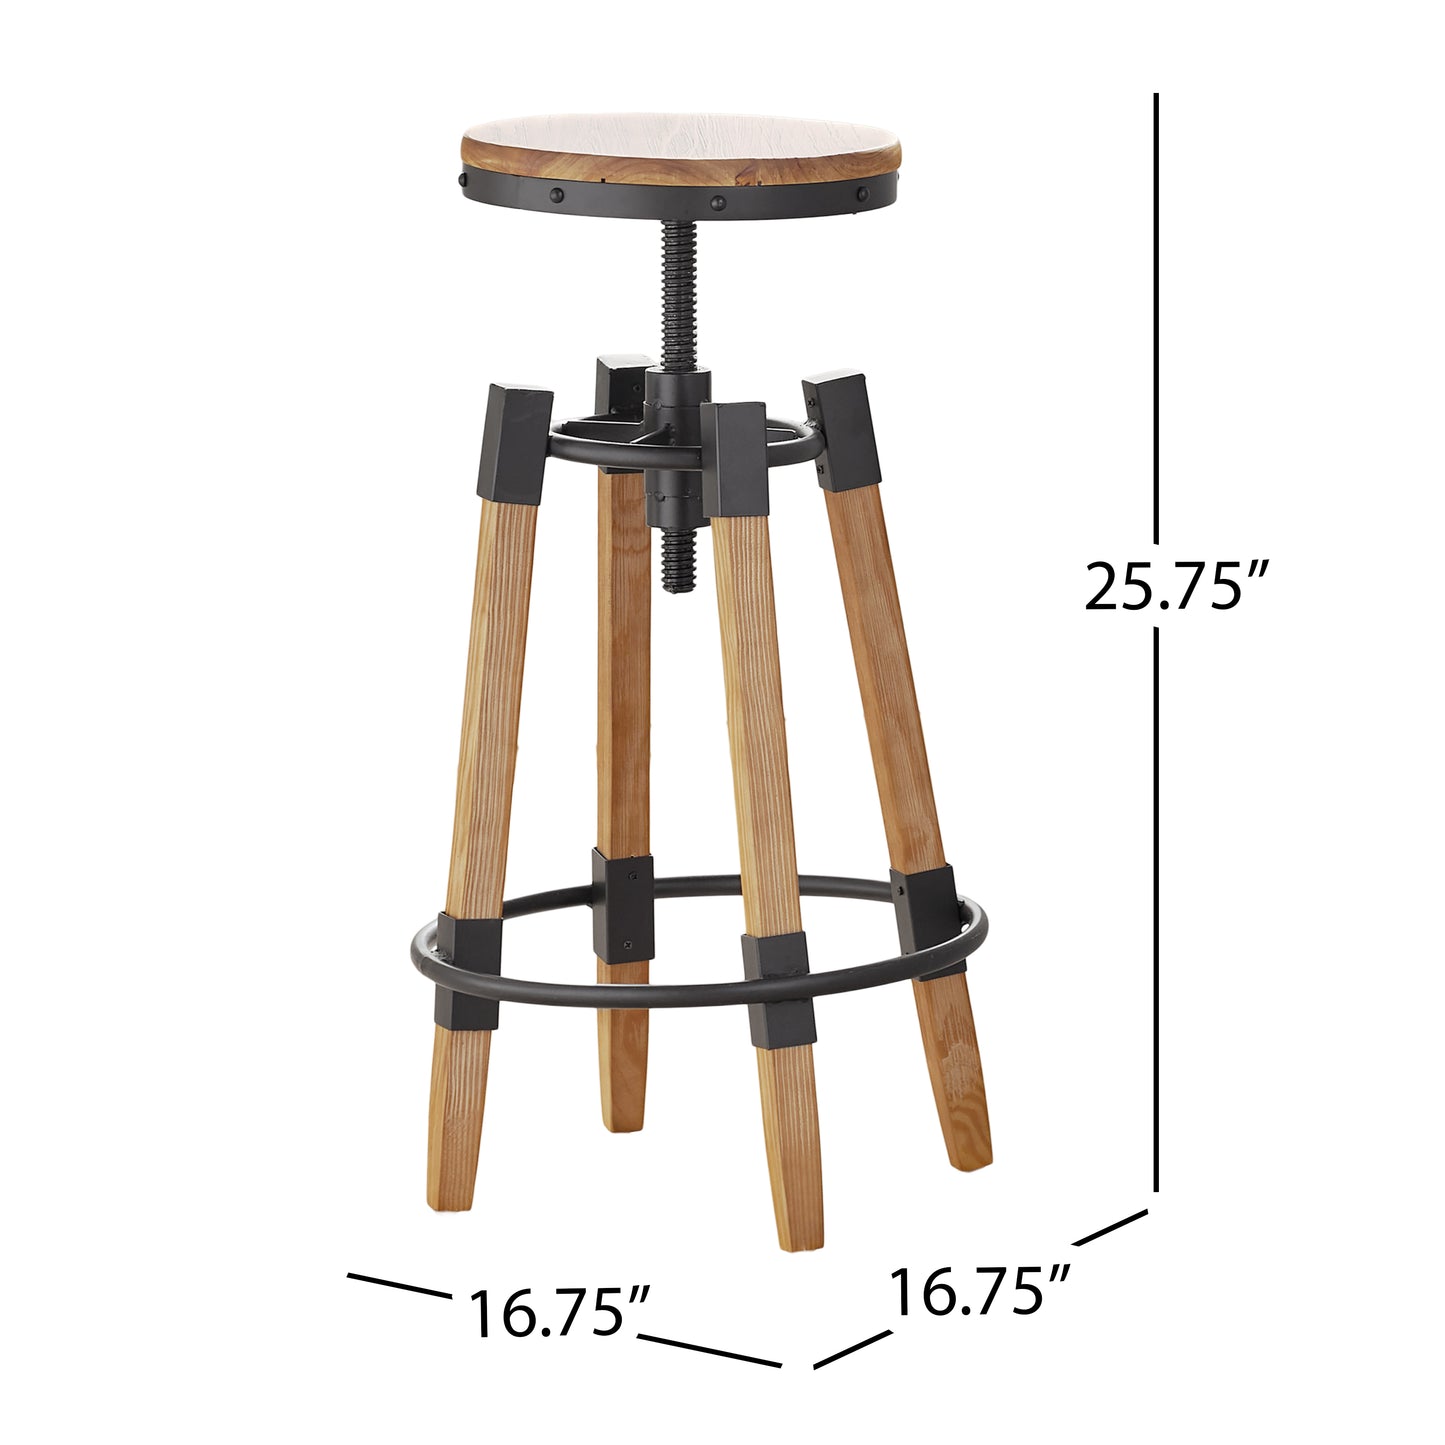 Javadel Modern Industrial Antique Firwood Adjustable Barstool with Iron Accents